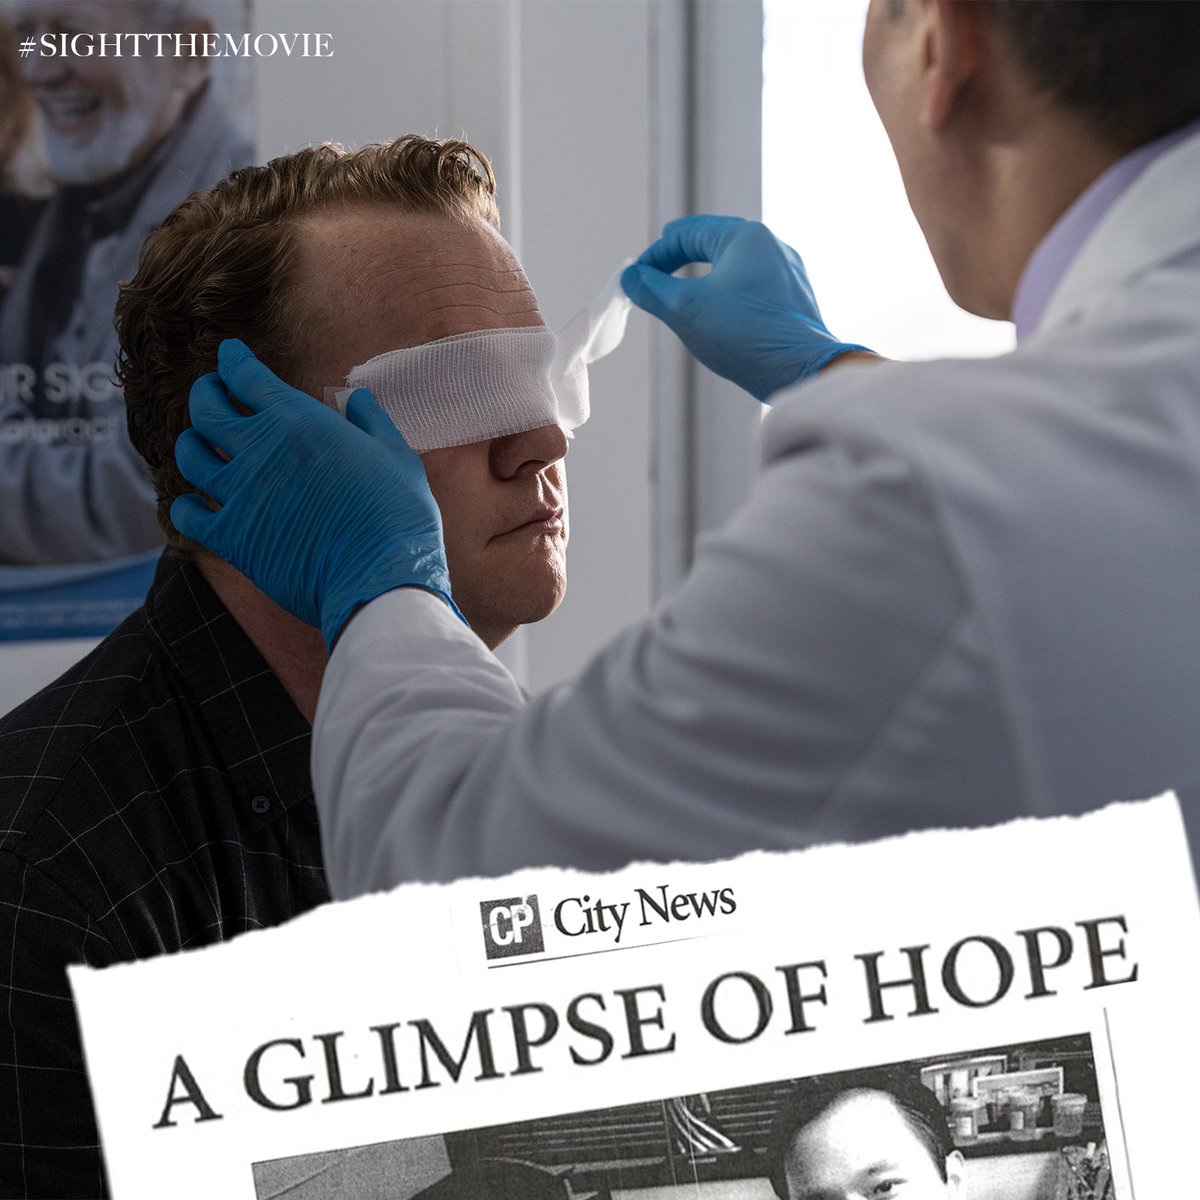 “A Glimpse of Hope” is exactly what the world needs right now, and we're so glad to have @DrMingWang's story as a beacon of that. #HappyNewYear from your #SightTheMovie family! We're wishing you all a joyful and transformative new year.